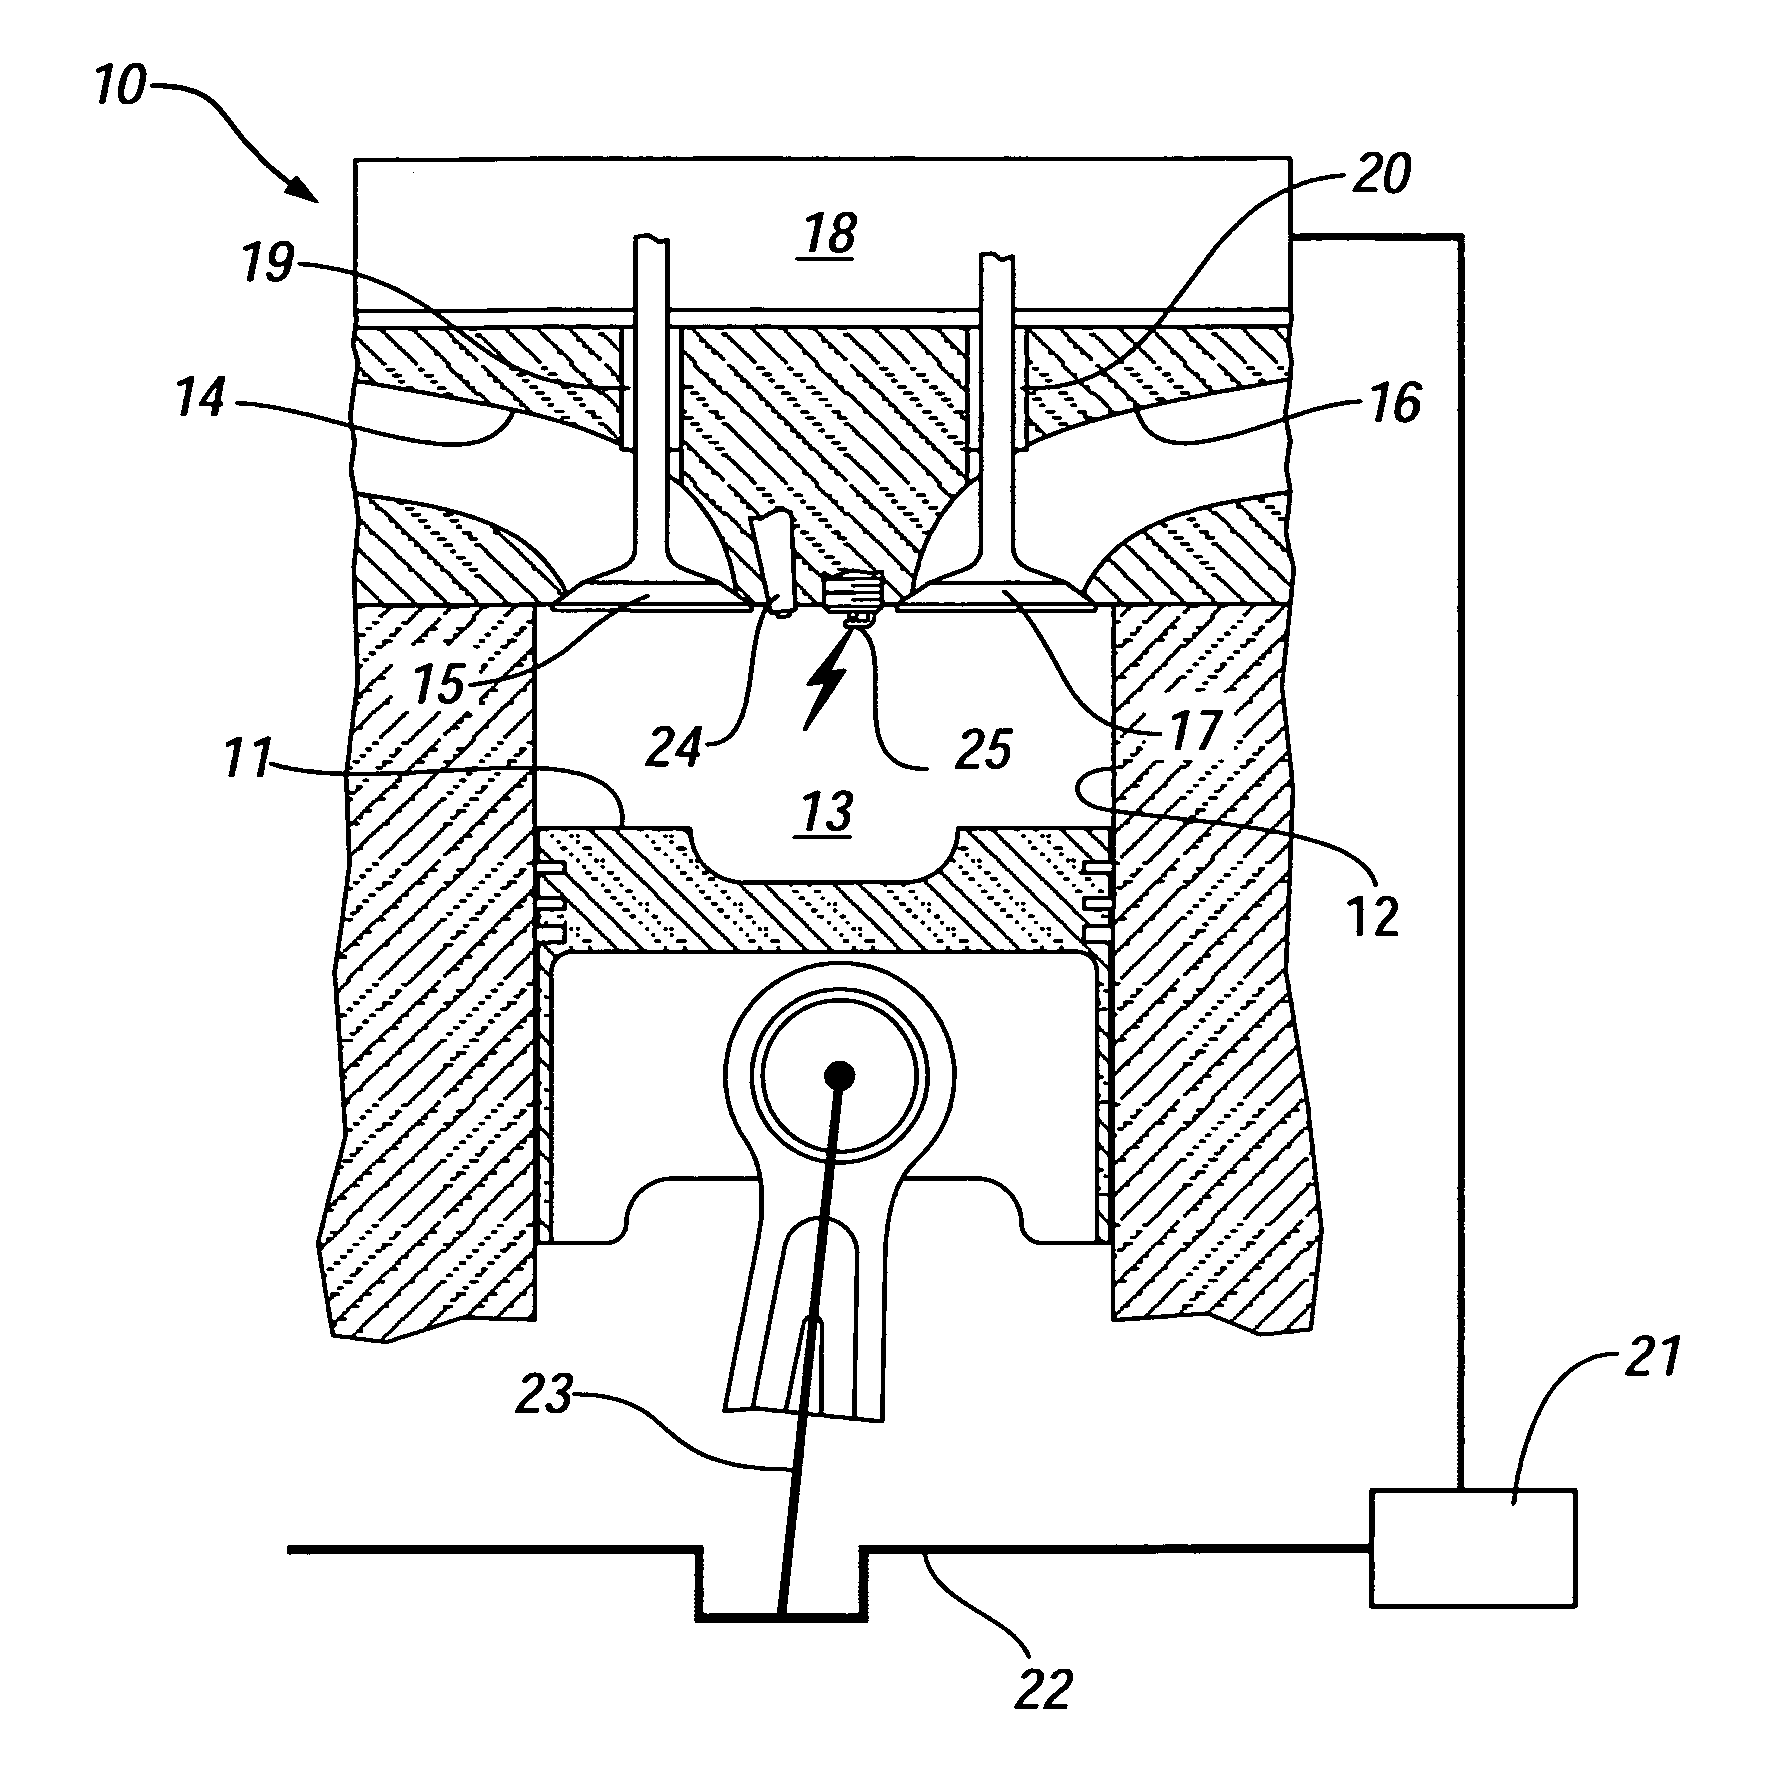 Method for transition between controlled auto-ignition and spark ignition modes in direct fuel injection engines